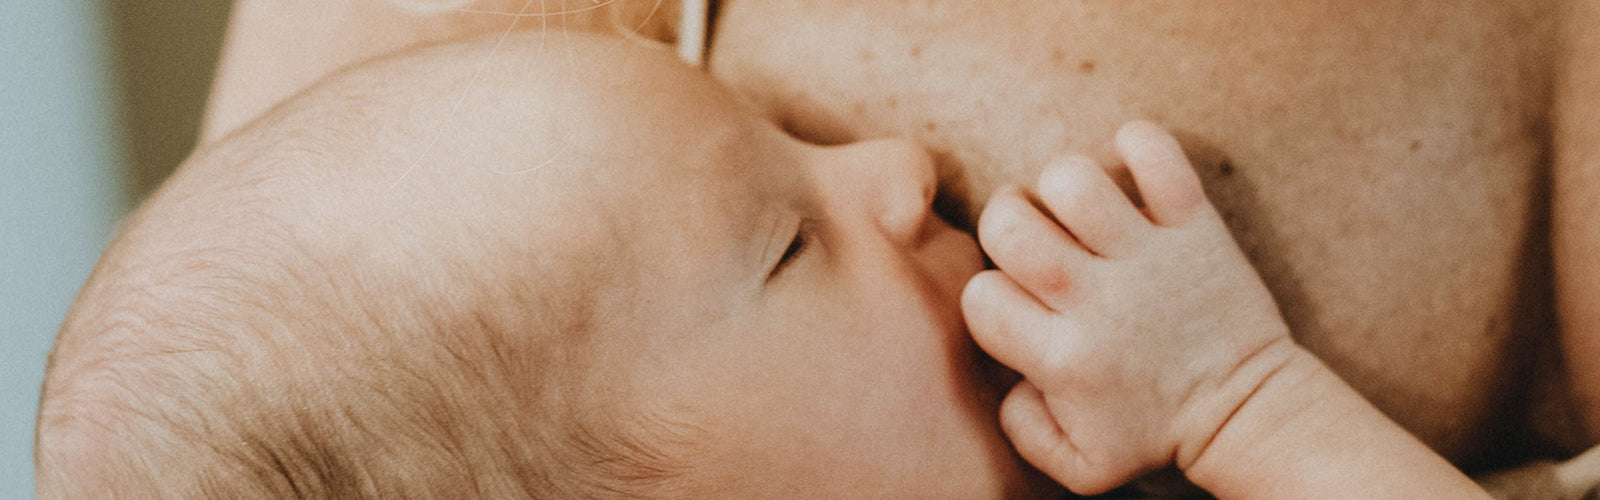 Breastfeeding essentials for new moms: A checklist for success & tips